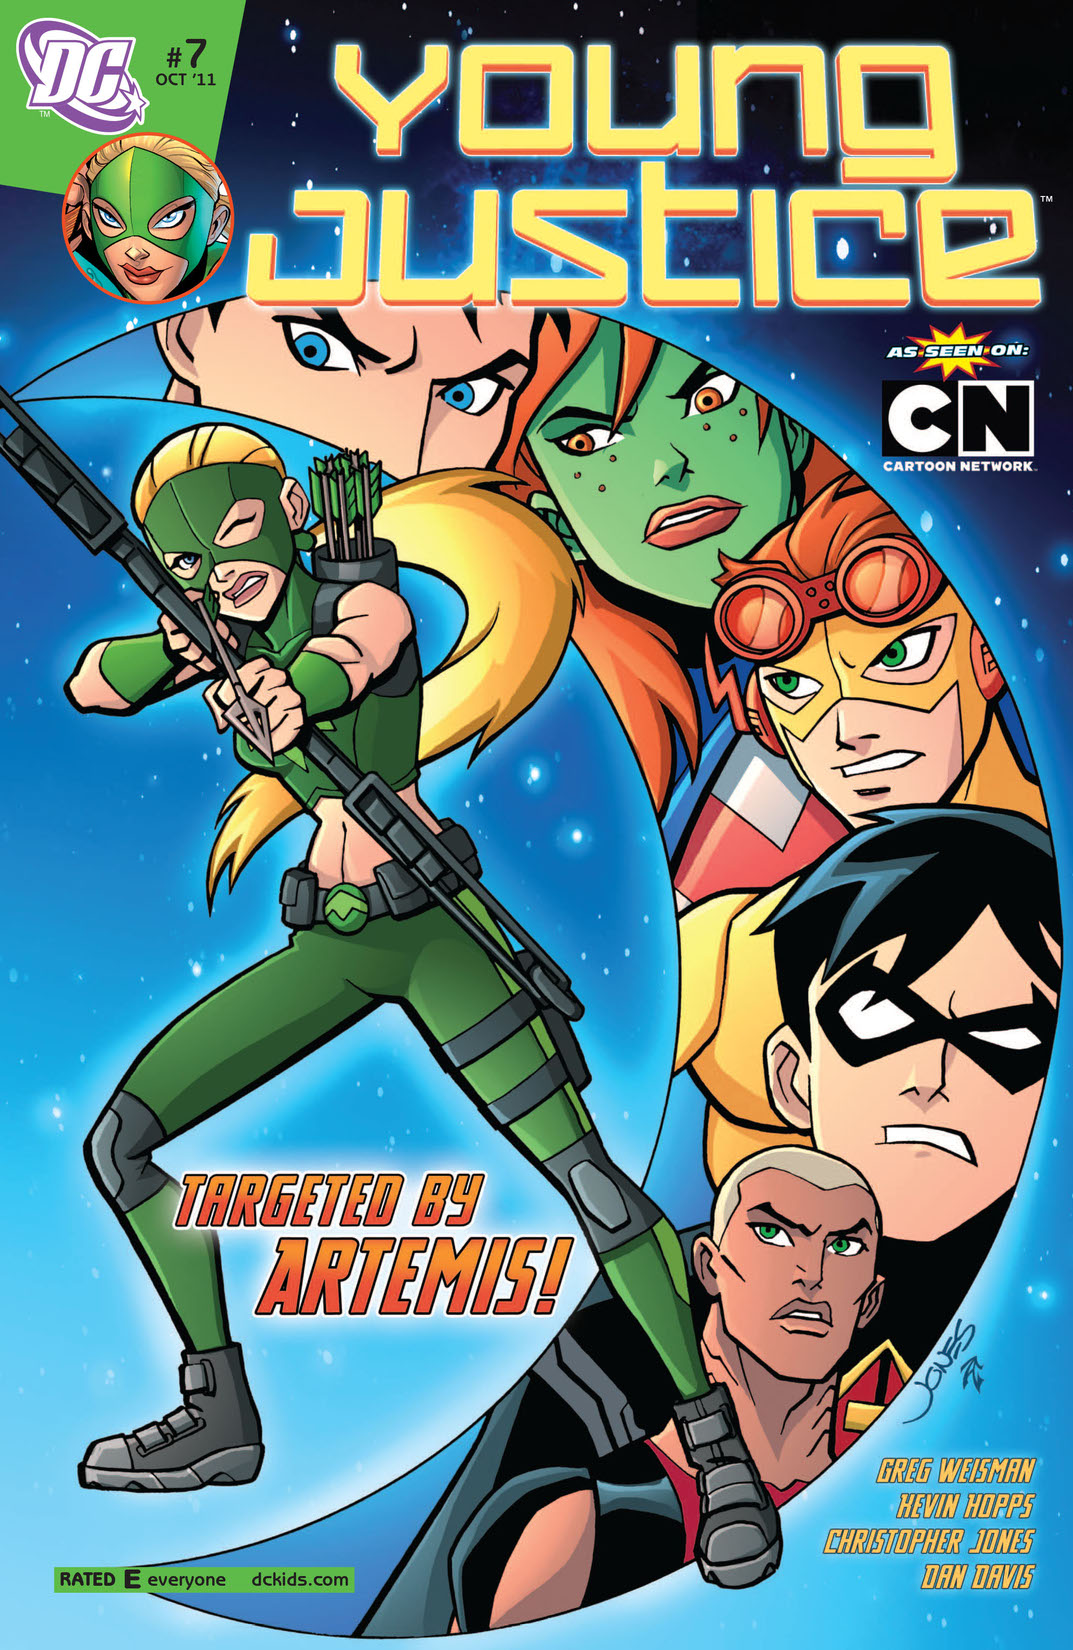 Young Justice (2011-2013) #7 preview images